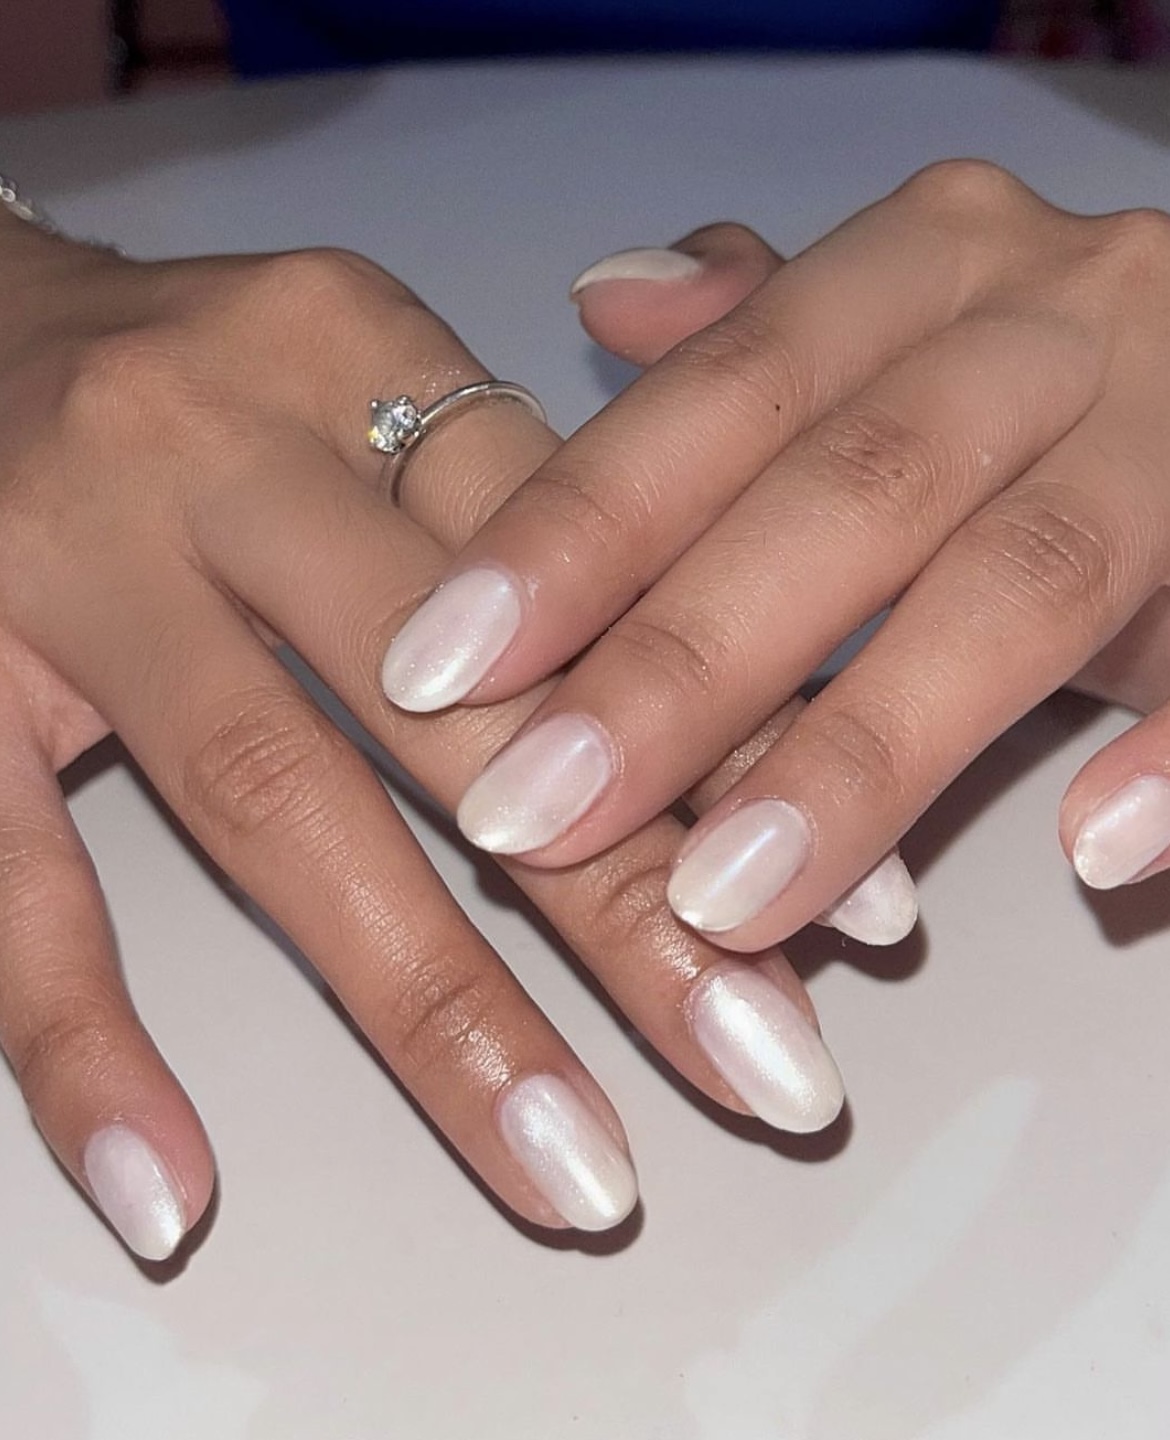 10 dos and don'ts during your nail appointment